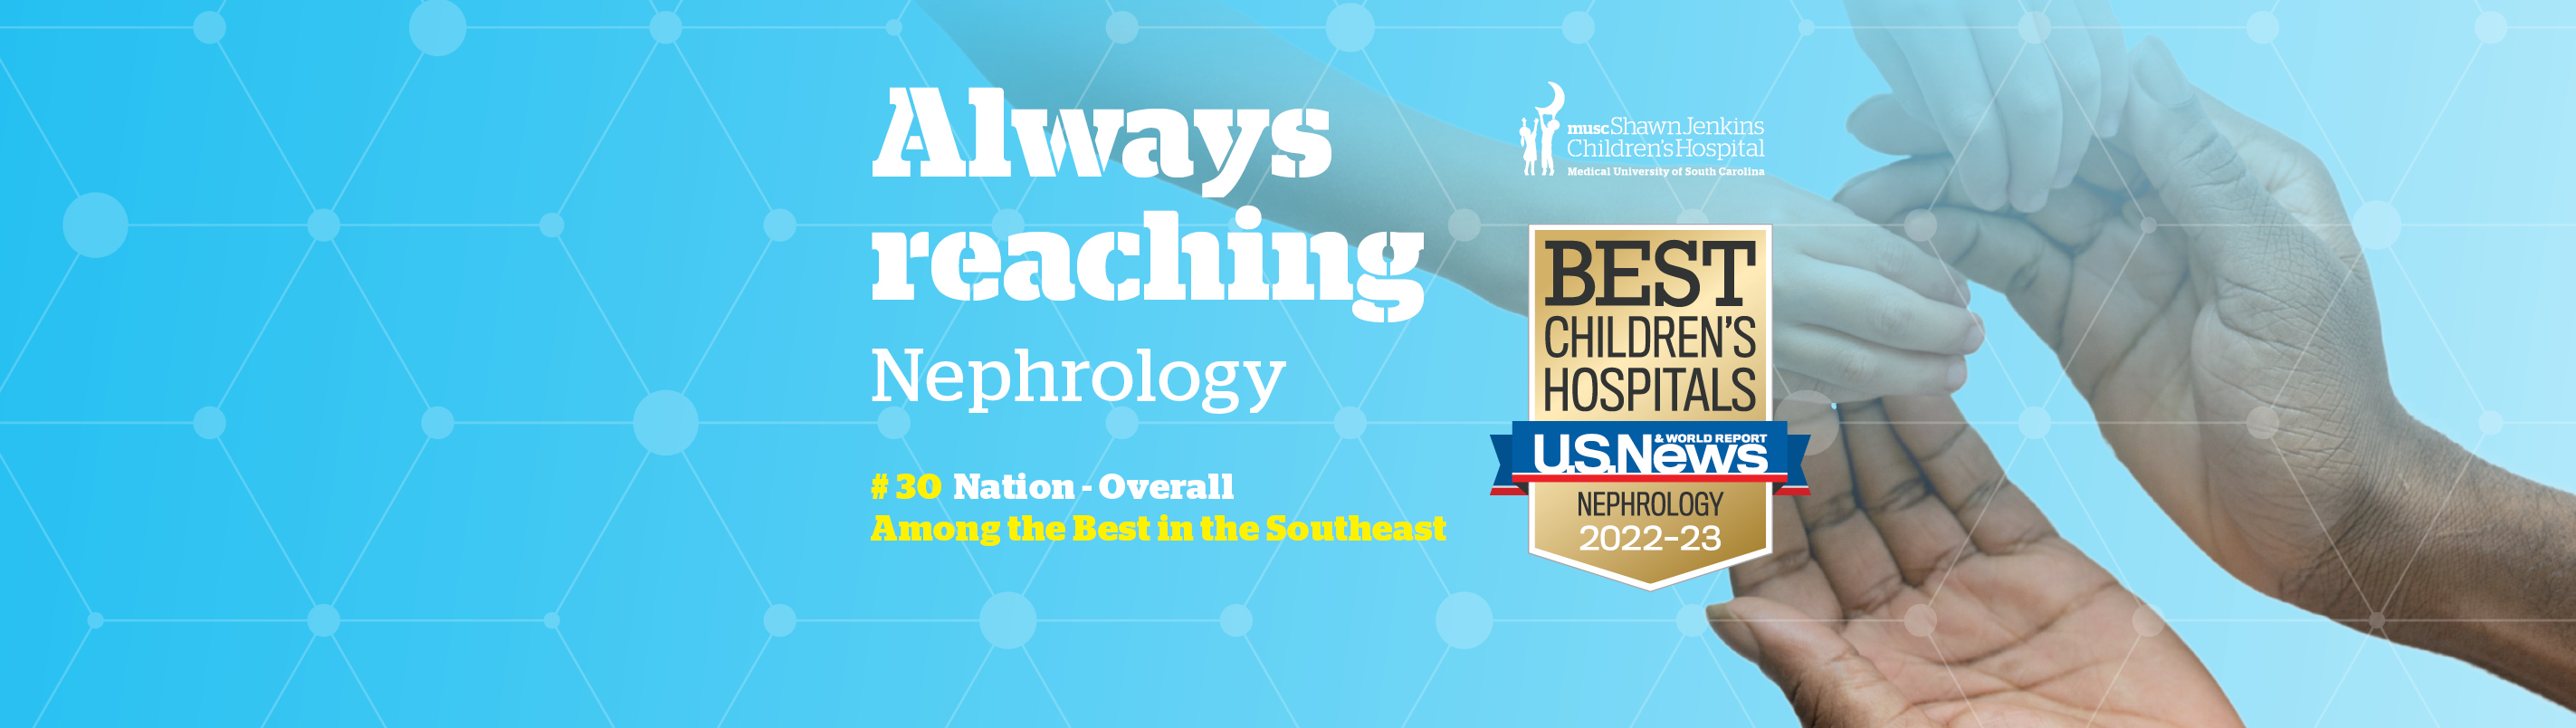 Always reaching | Nephrology Ranked by U.S. News & World Report | #30 Nation - Overall, #3 Southeast - Overall, #3 Southeast - Outcomes | Best Children's Hospitals U.S. News & World Report 2022-23